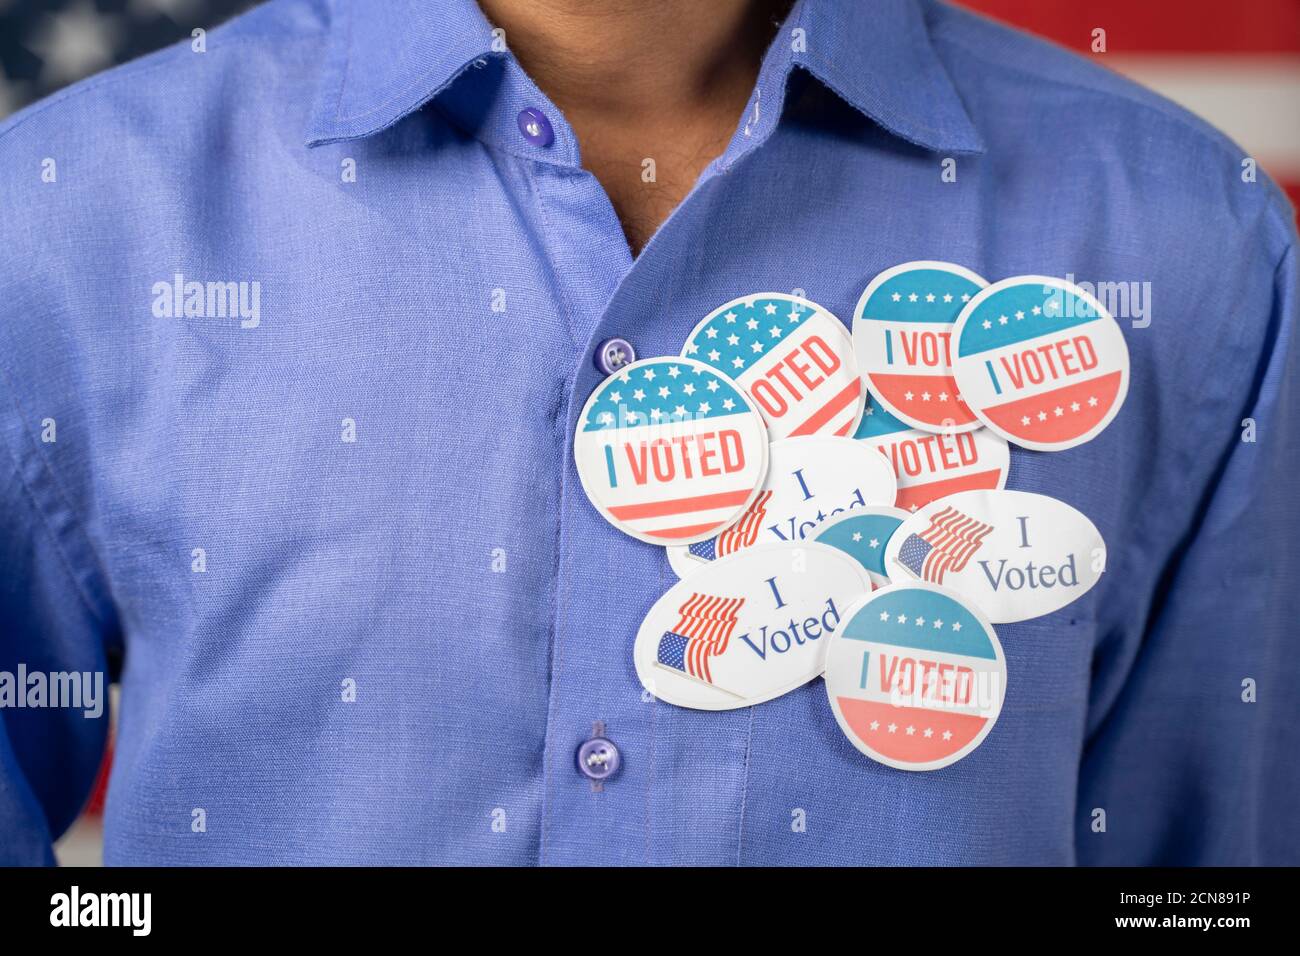 Close up of multiple I Voted stickers on blue shirt - Concept of US election voter fraud by placing multiple voting stickers Stock Photo